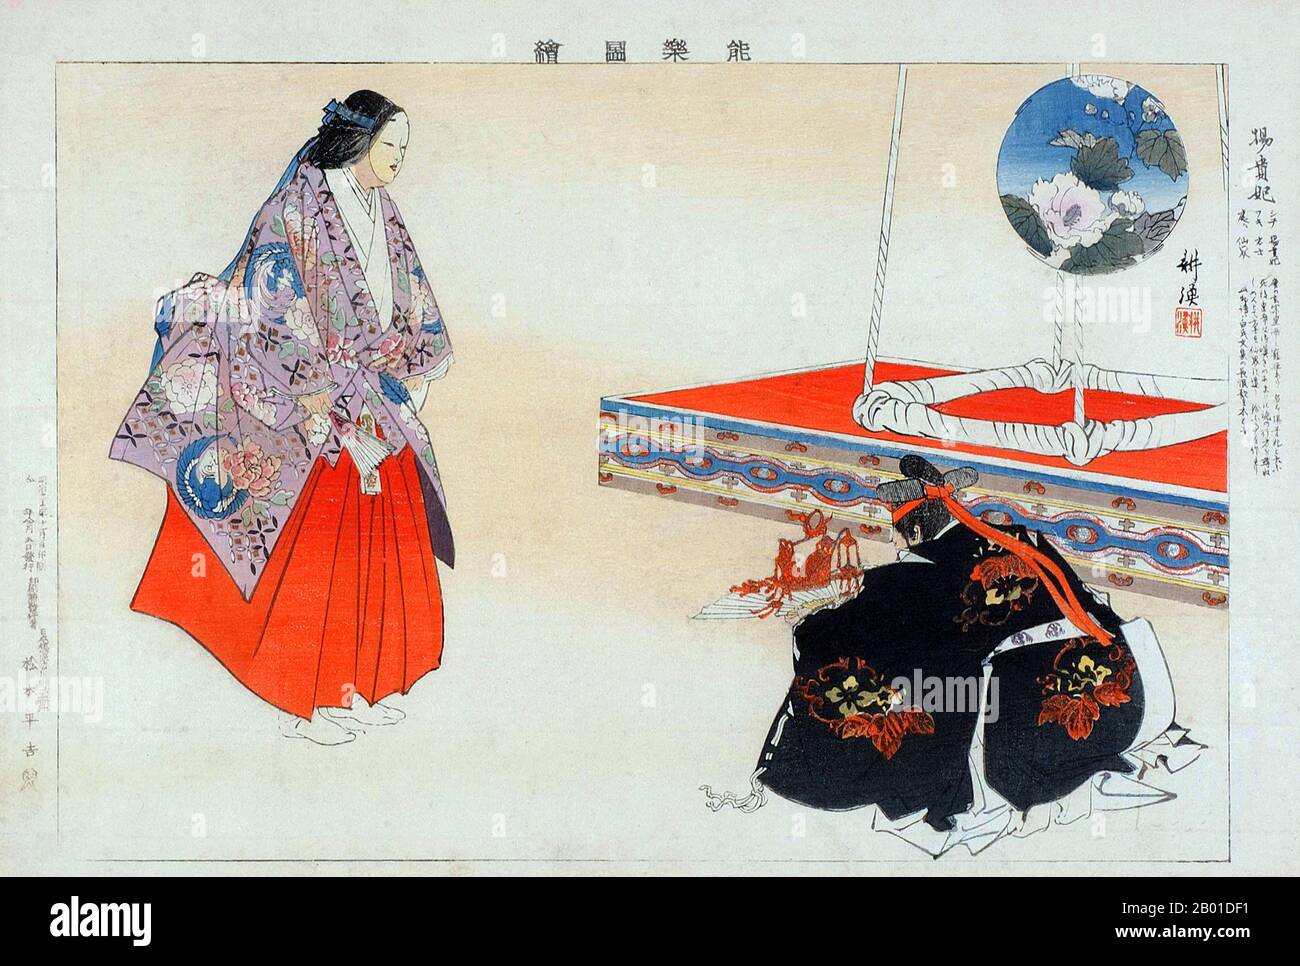 Japan: 'Yôkihi'. Ukiyo-e woodblock print from the series 'Nogaku zue' (Pictures of No Theatre) by Kōgyo Tsukioka (1869-1927), 1897.  A Japanese painting of Yang Gueifei, celebrated in Japan as Yokihi.  Consort Yang Yuhuan (1 June 719 - 15 July 756), often known as Yang Guifei (Guifei being the highest rank for imperial consorts during her time), known briefly by the Taoist nun name Taizhen, is famous as one of the Four Beauties of ancient China.  She was the beloved consort of Emperor Xuanzong of Tang during his later years. Stock Photo